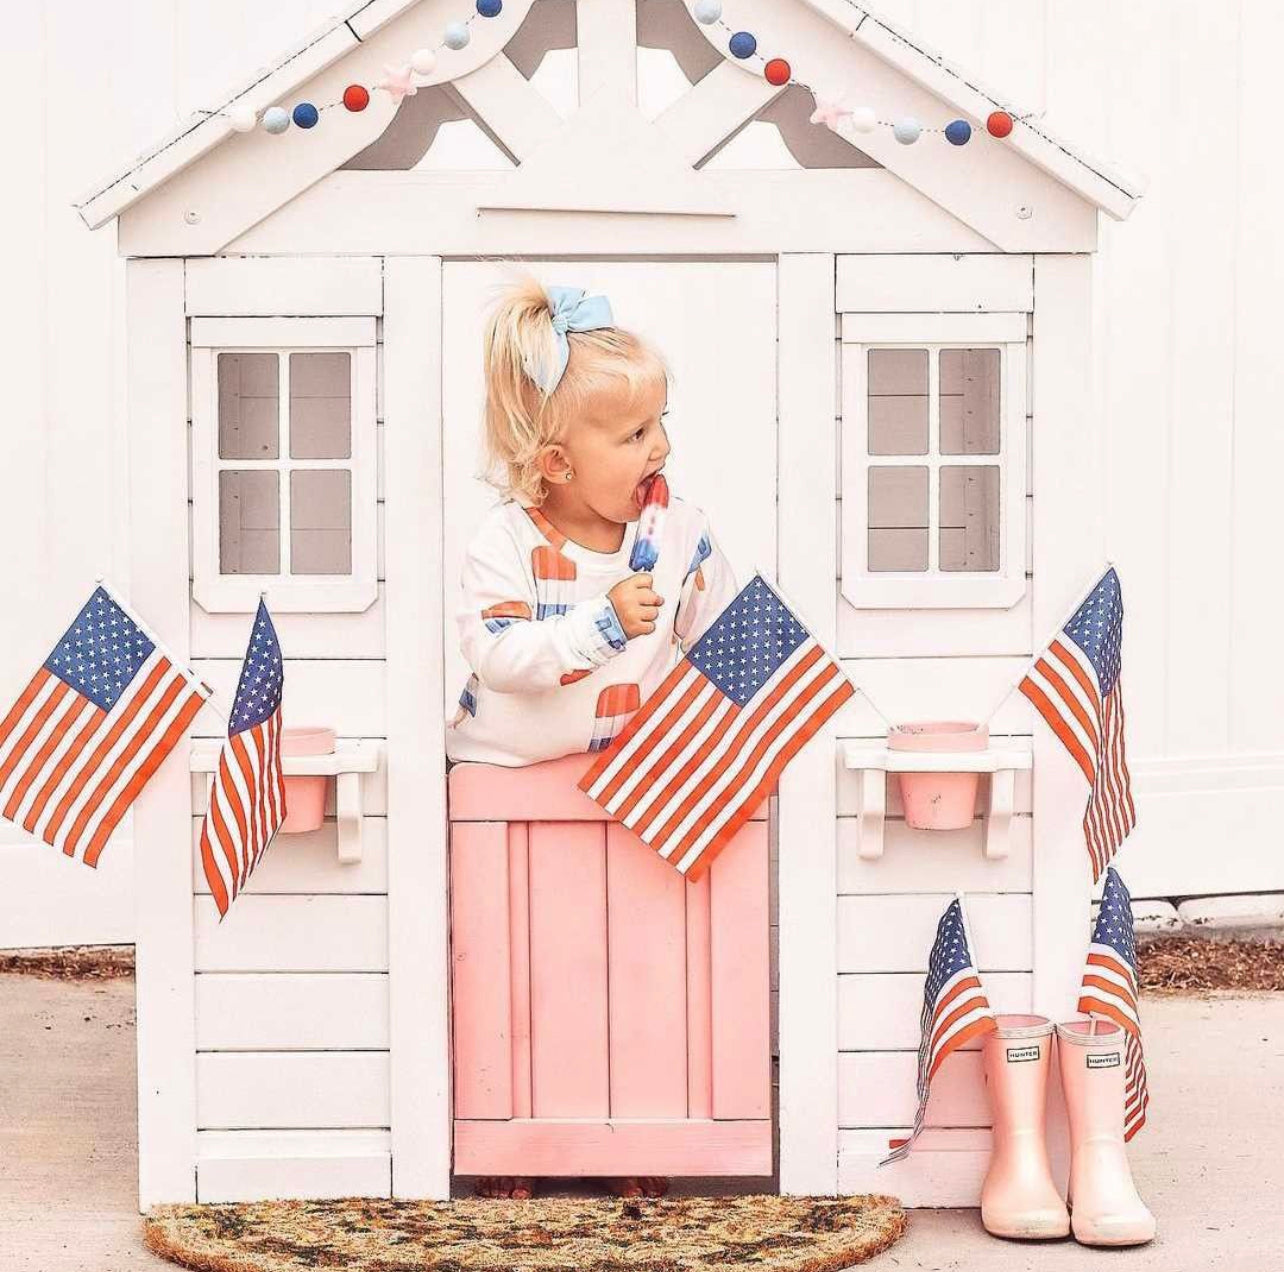 Wooden Playhouse for Kids Outdoor Indoor Play set | Playroom | Kids play